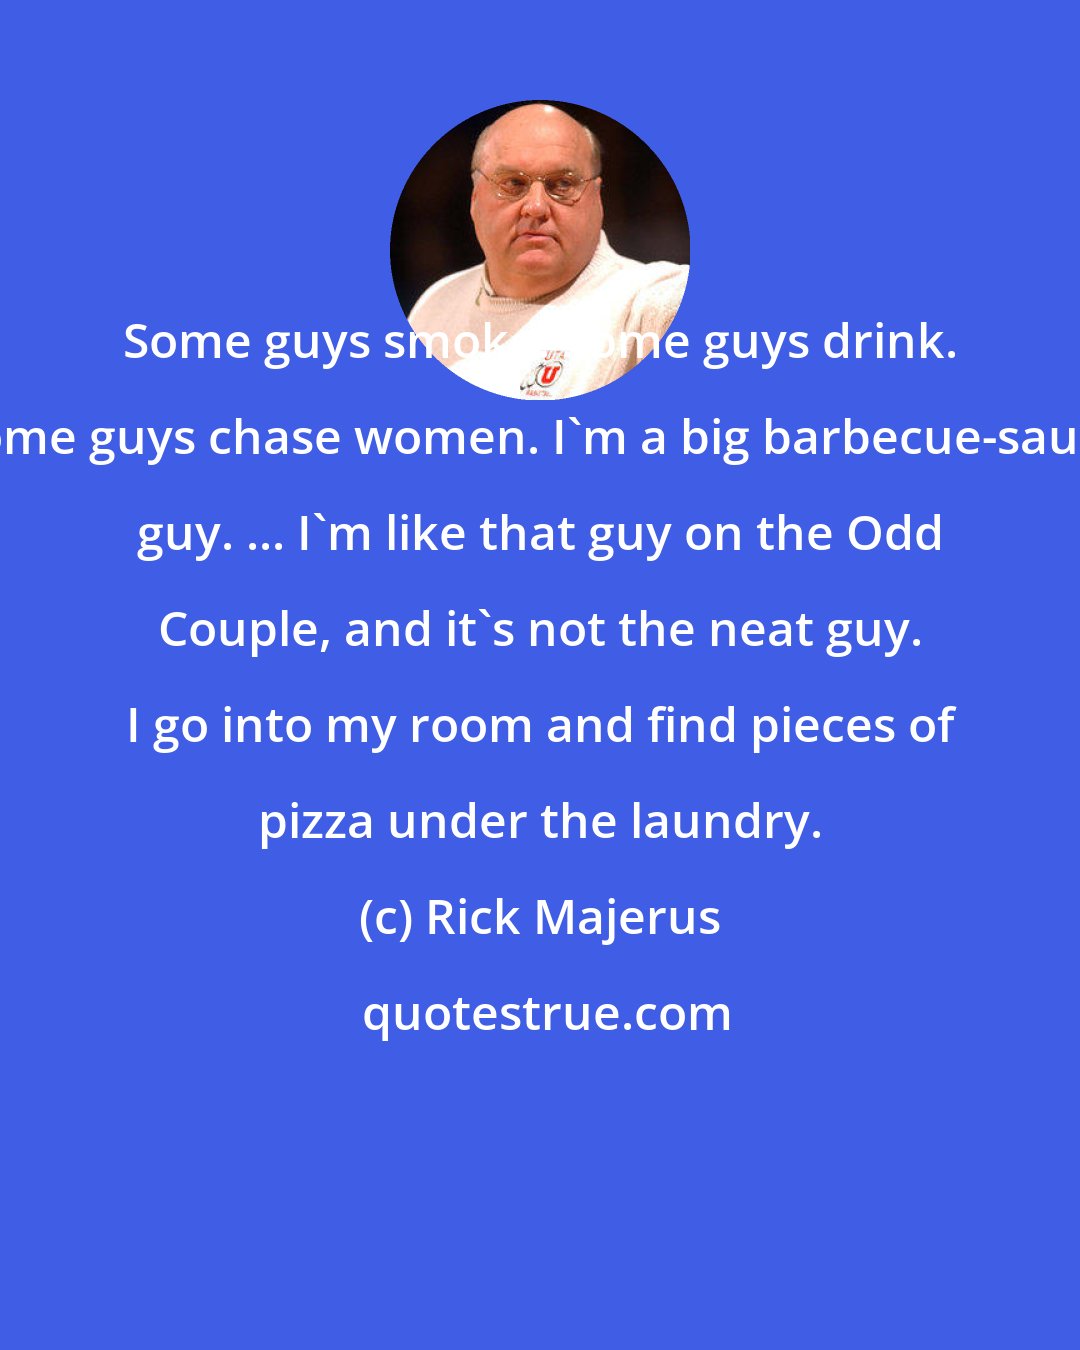 Rick Majerus: Some guys smoke. Some guys drink. Some guys chase women. I'm a big barbecue-sauce guy. ... I'm like that guy on the Odd Couple, and it's not the neat guy. I go into my room and find pieces of pizza under the laundry.